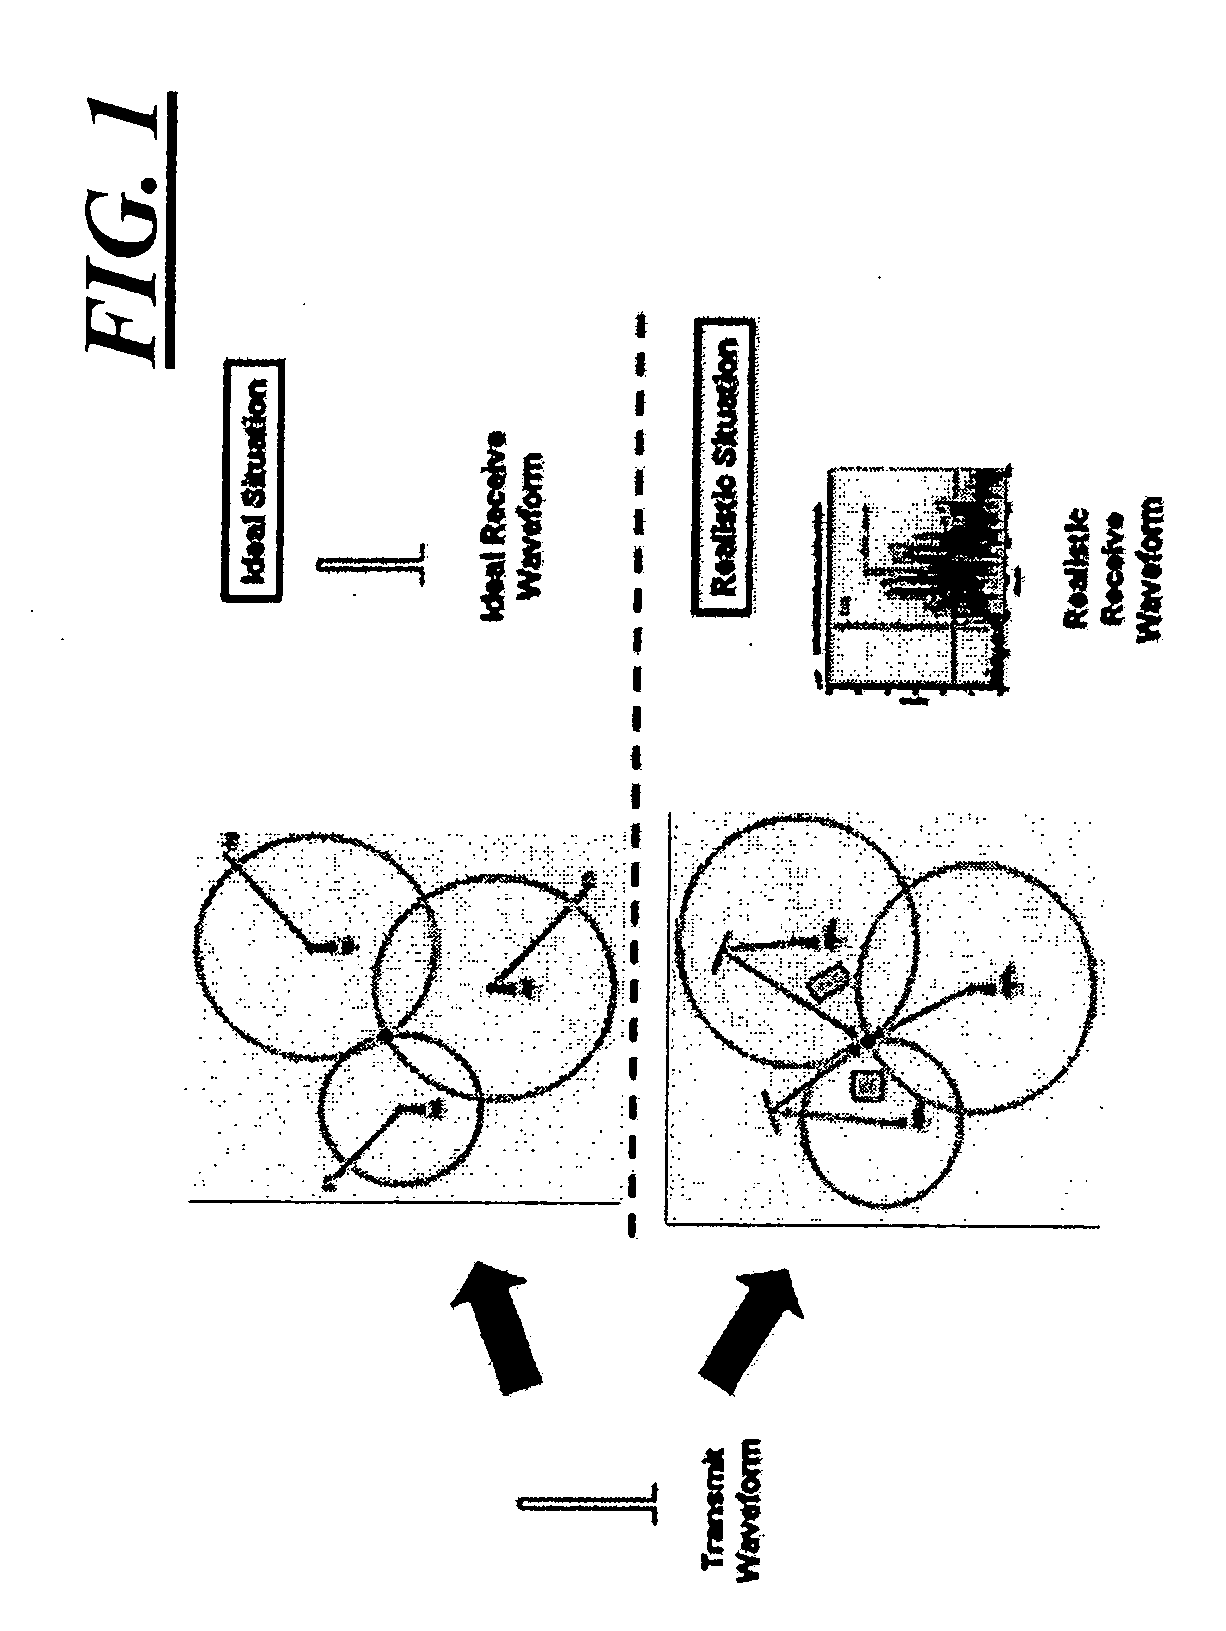 Systems and methods for positioning using multipath signals